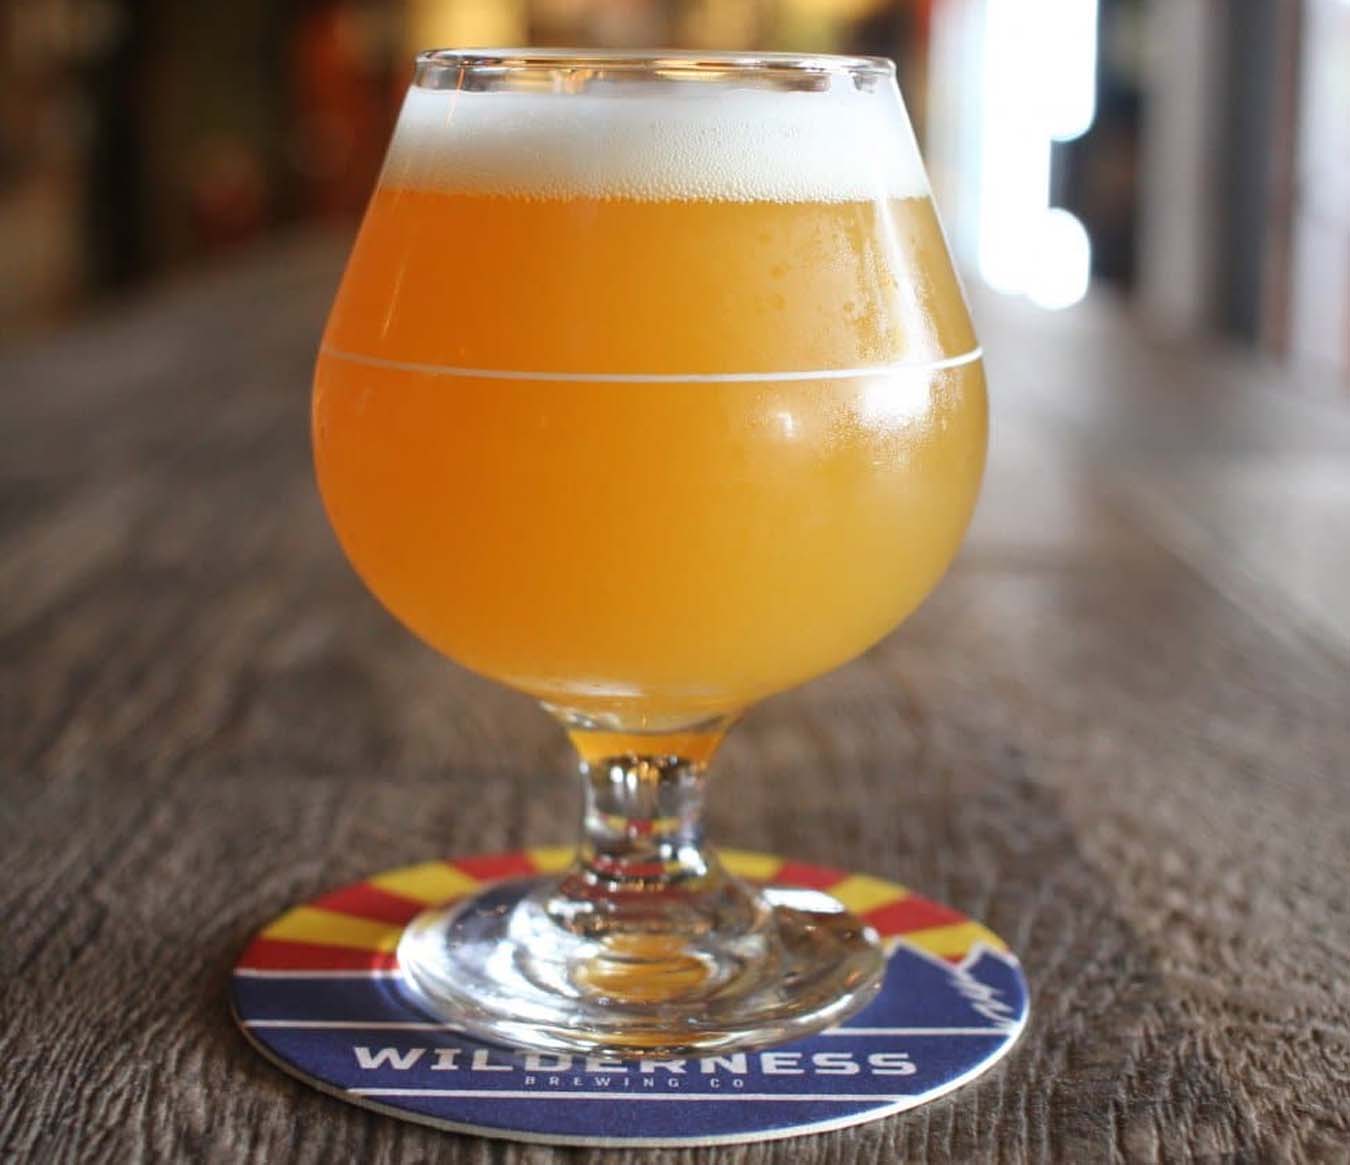 Where to Eat In Phoenix - Arizona Wilderness Brewing Co.